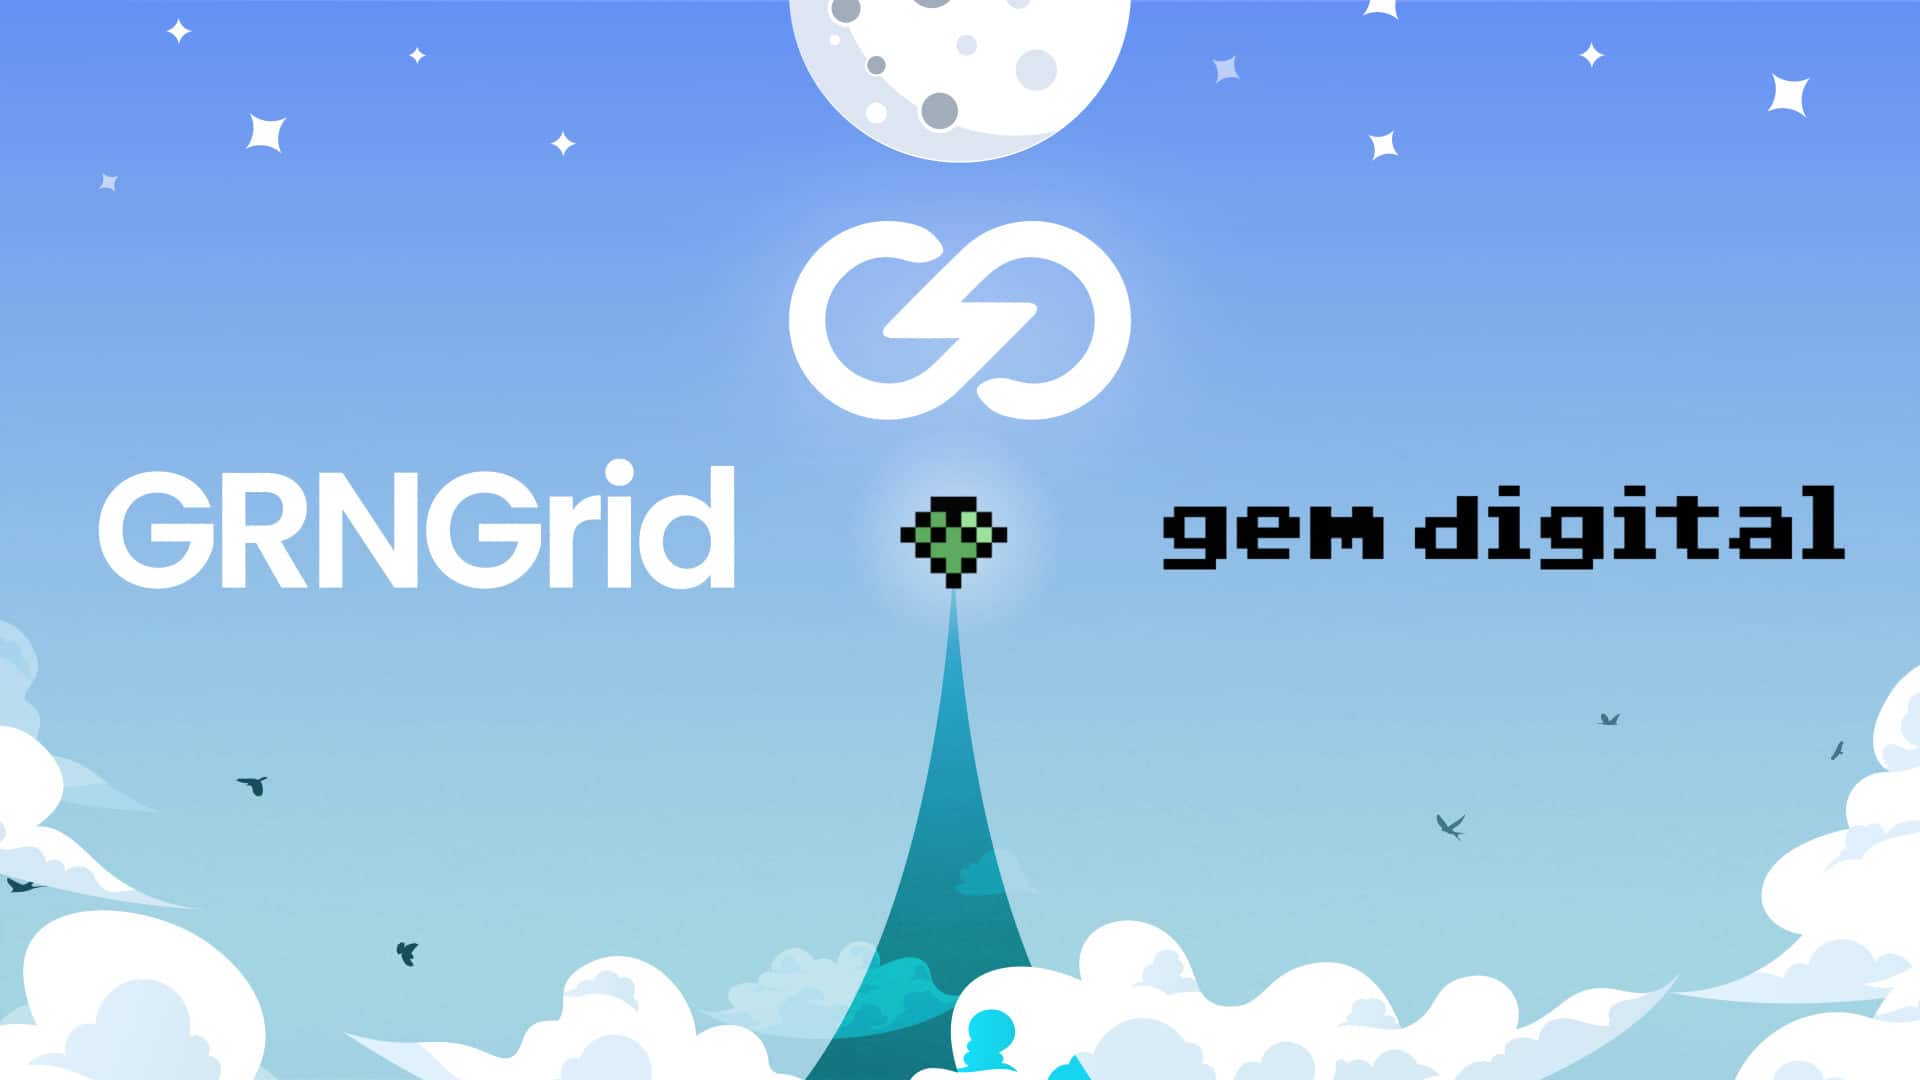 Grngrid-secures-$50-million-investment-commitment-from-gem-digital